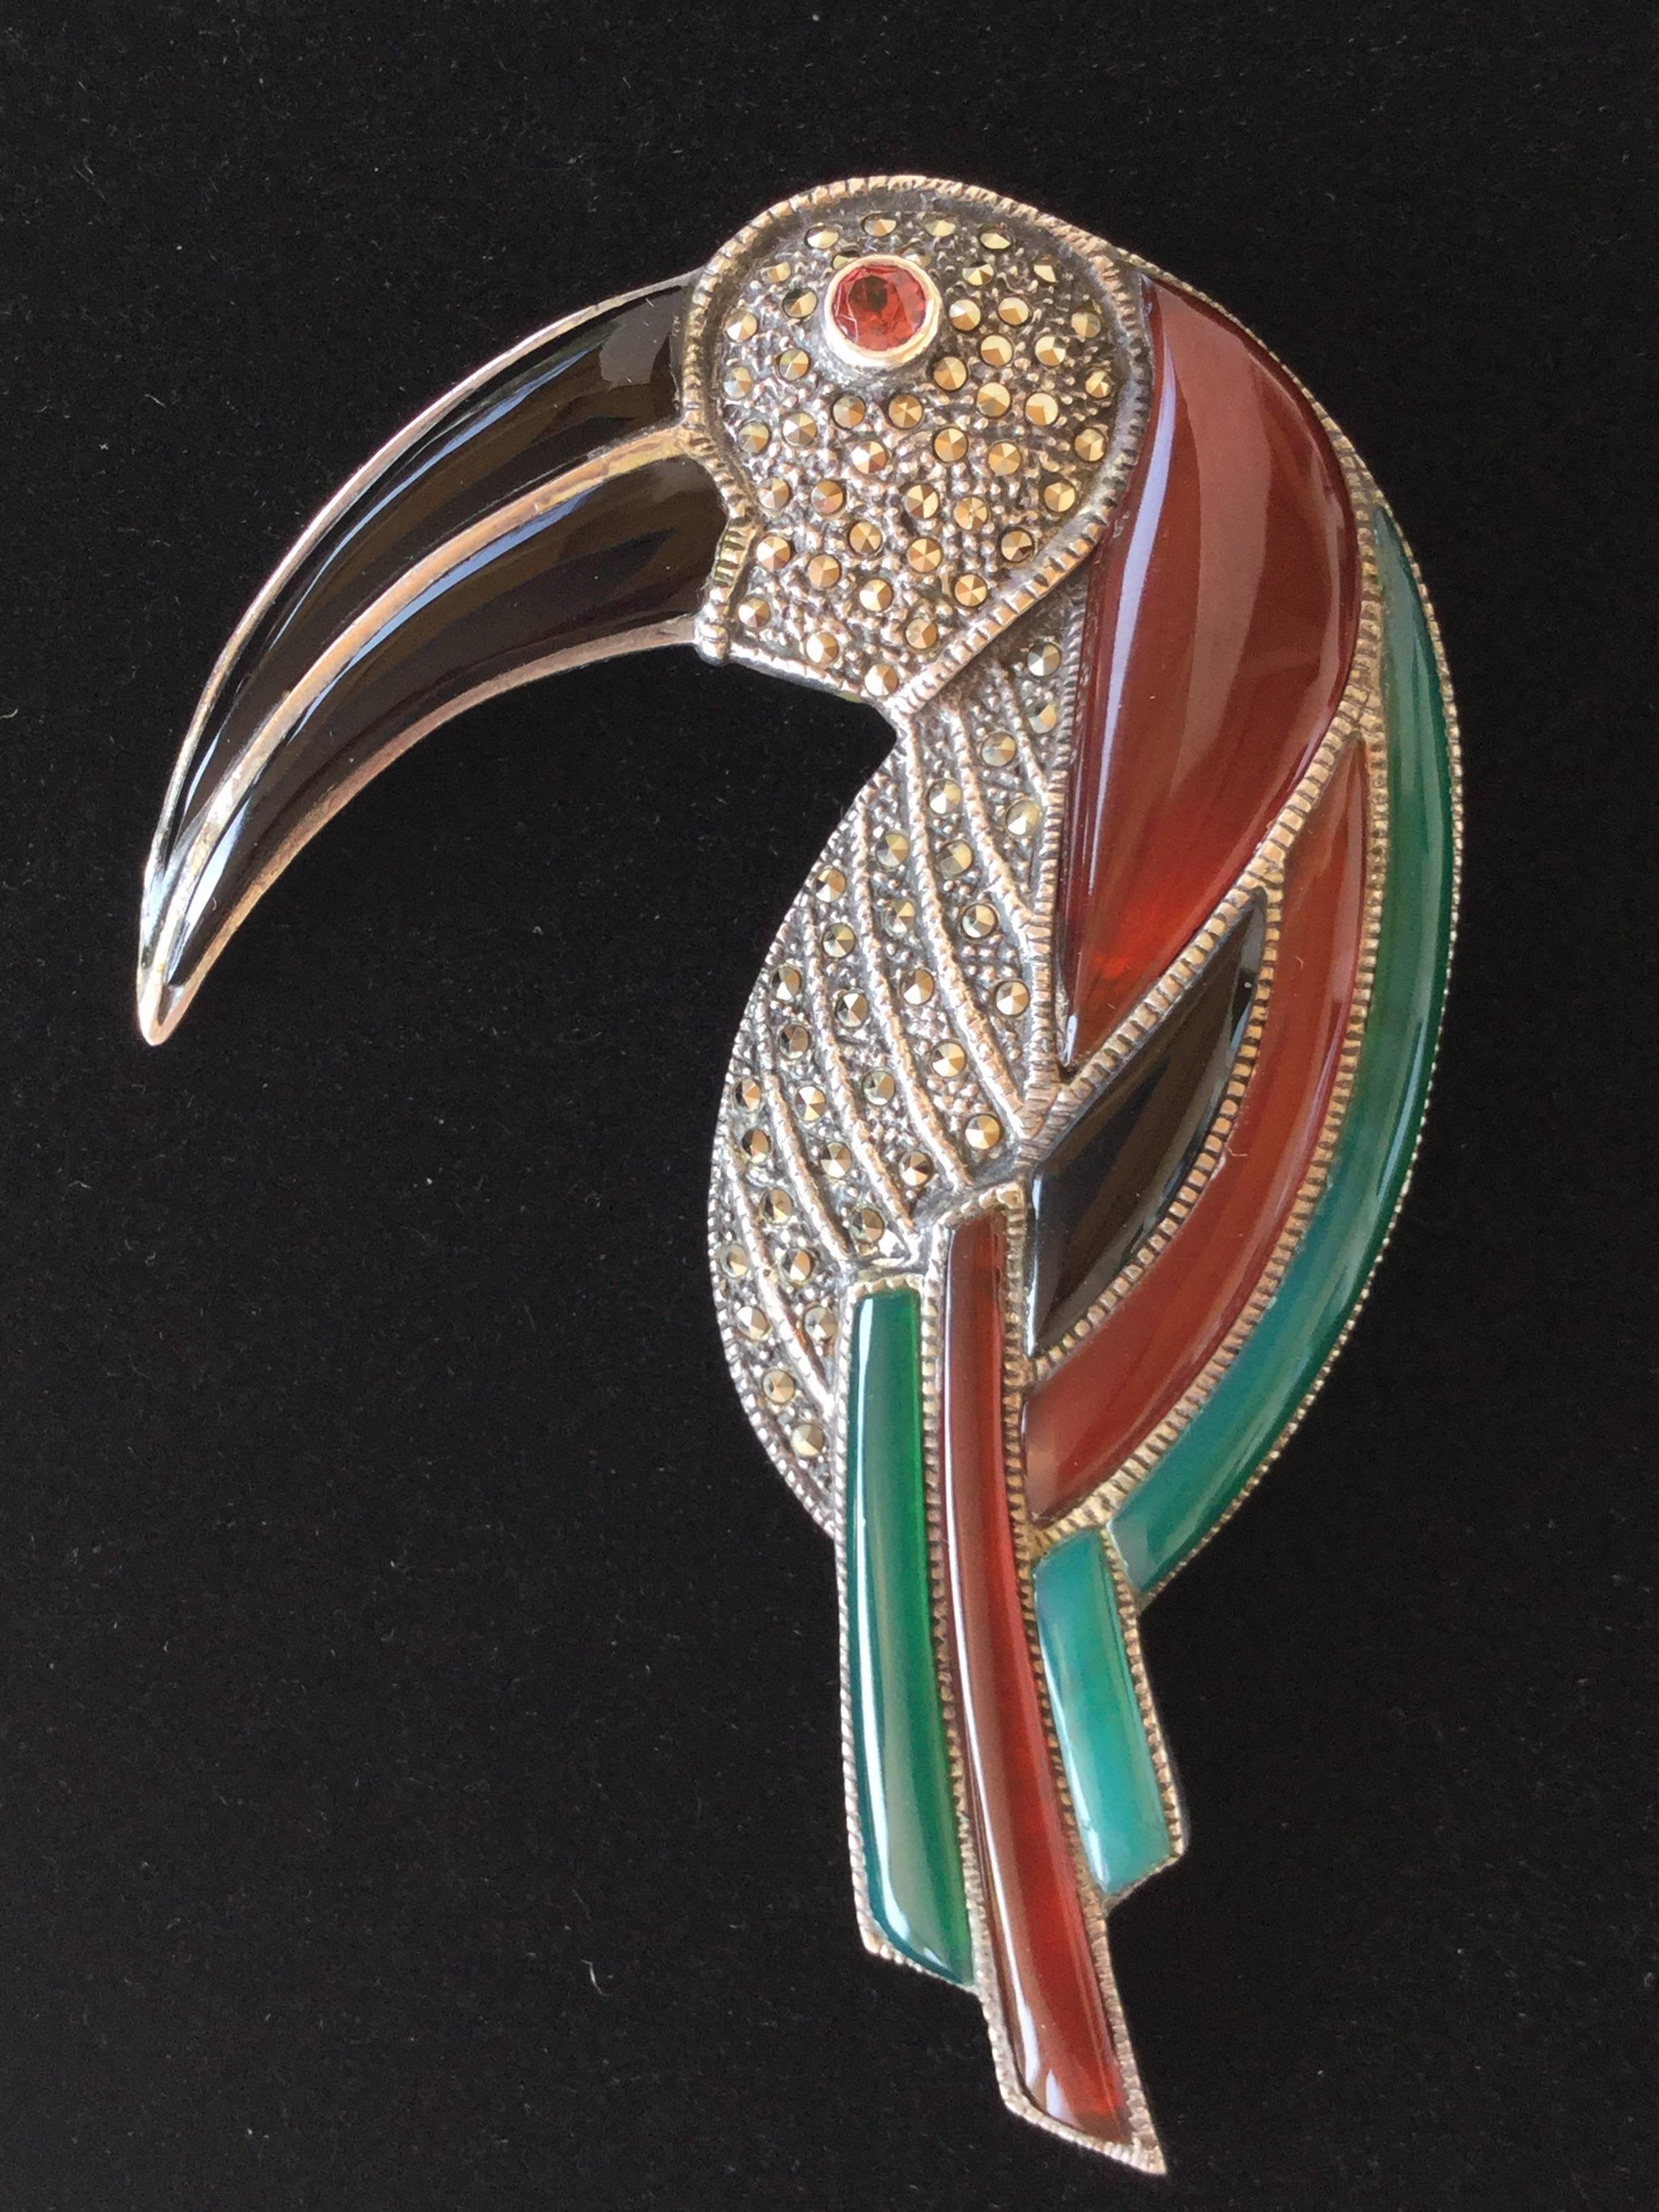 This large scale Deco Style sterling silver toucan brooch is made of beautifully translucent carnelian, chrysoprase, and onyx segments accented with sparkling marcasites.  The detail and quality is just amazing right down to it's genuine garnet eye.